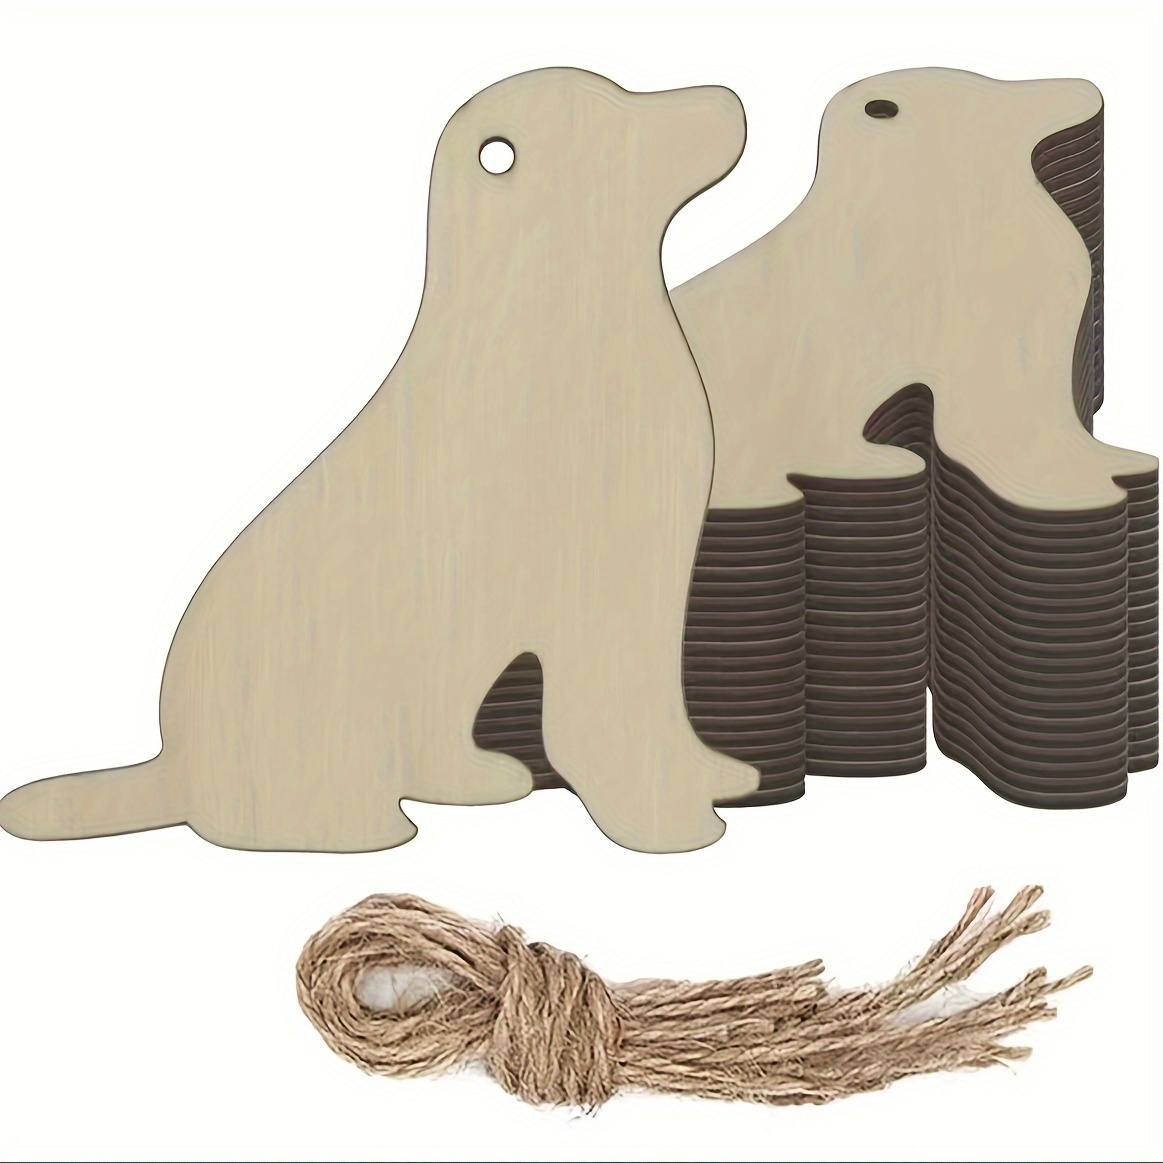 

15pcs Dog Shaped Wooden Diy Crafts Cute Puppy Wooden Cut Wooden Label With Rope For Home Diy Project Craft Decoration